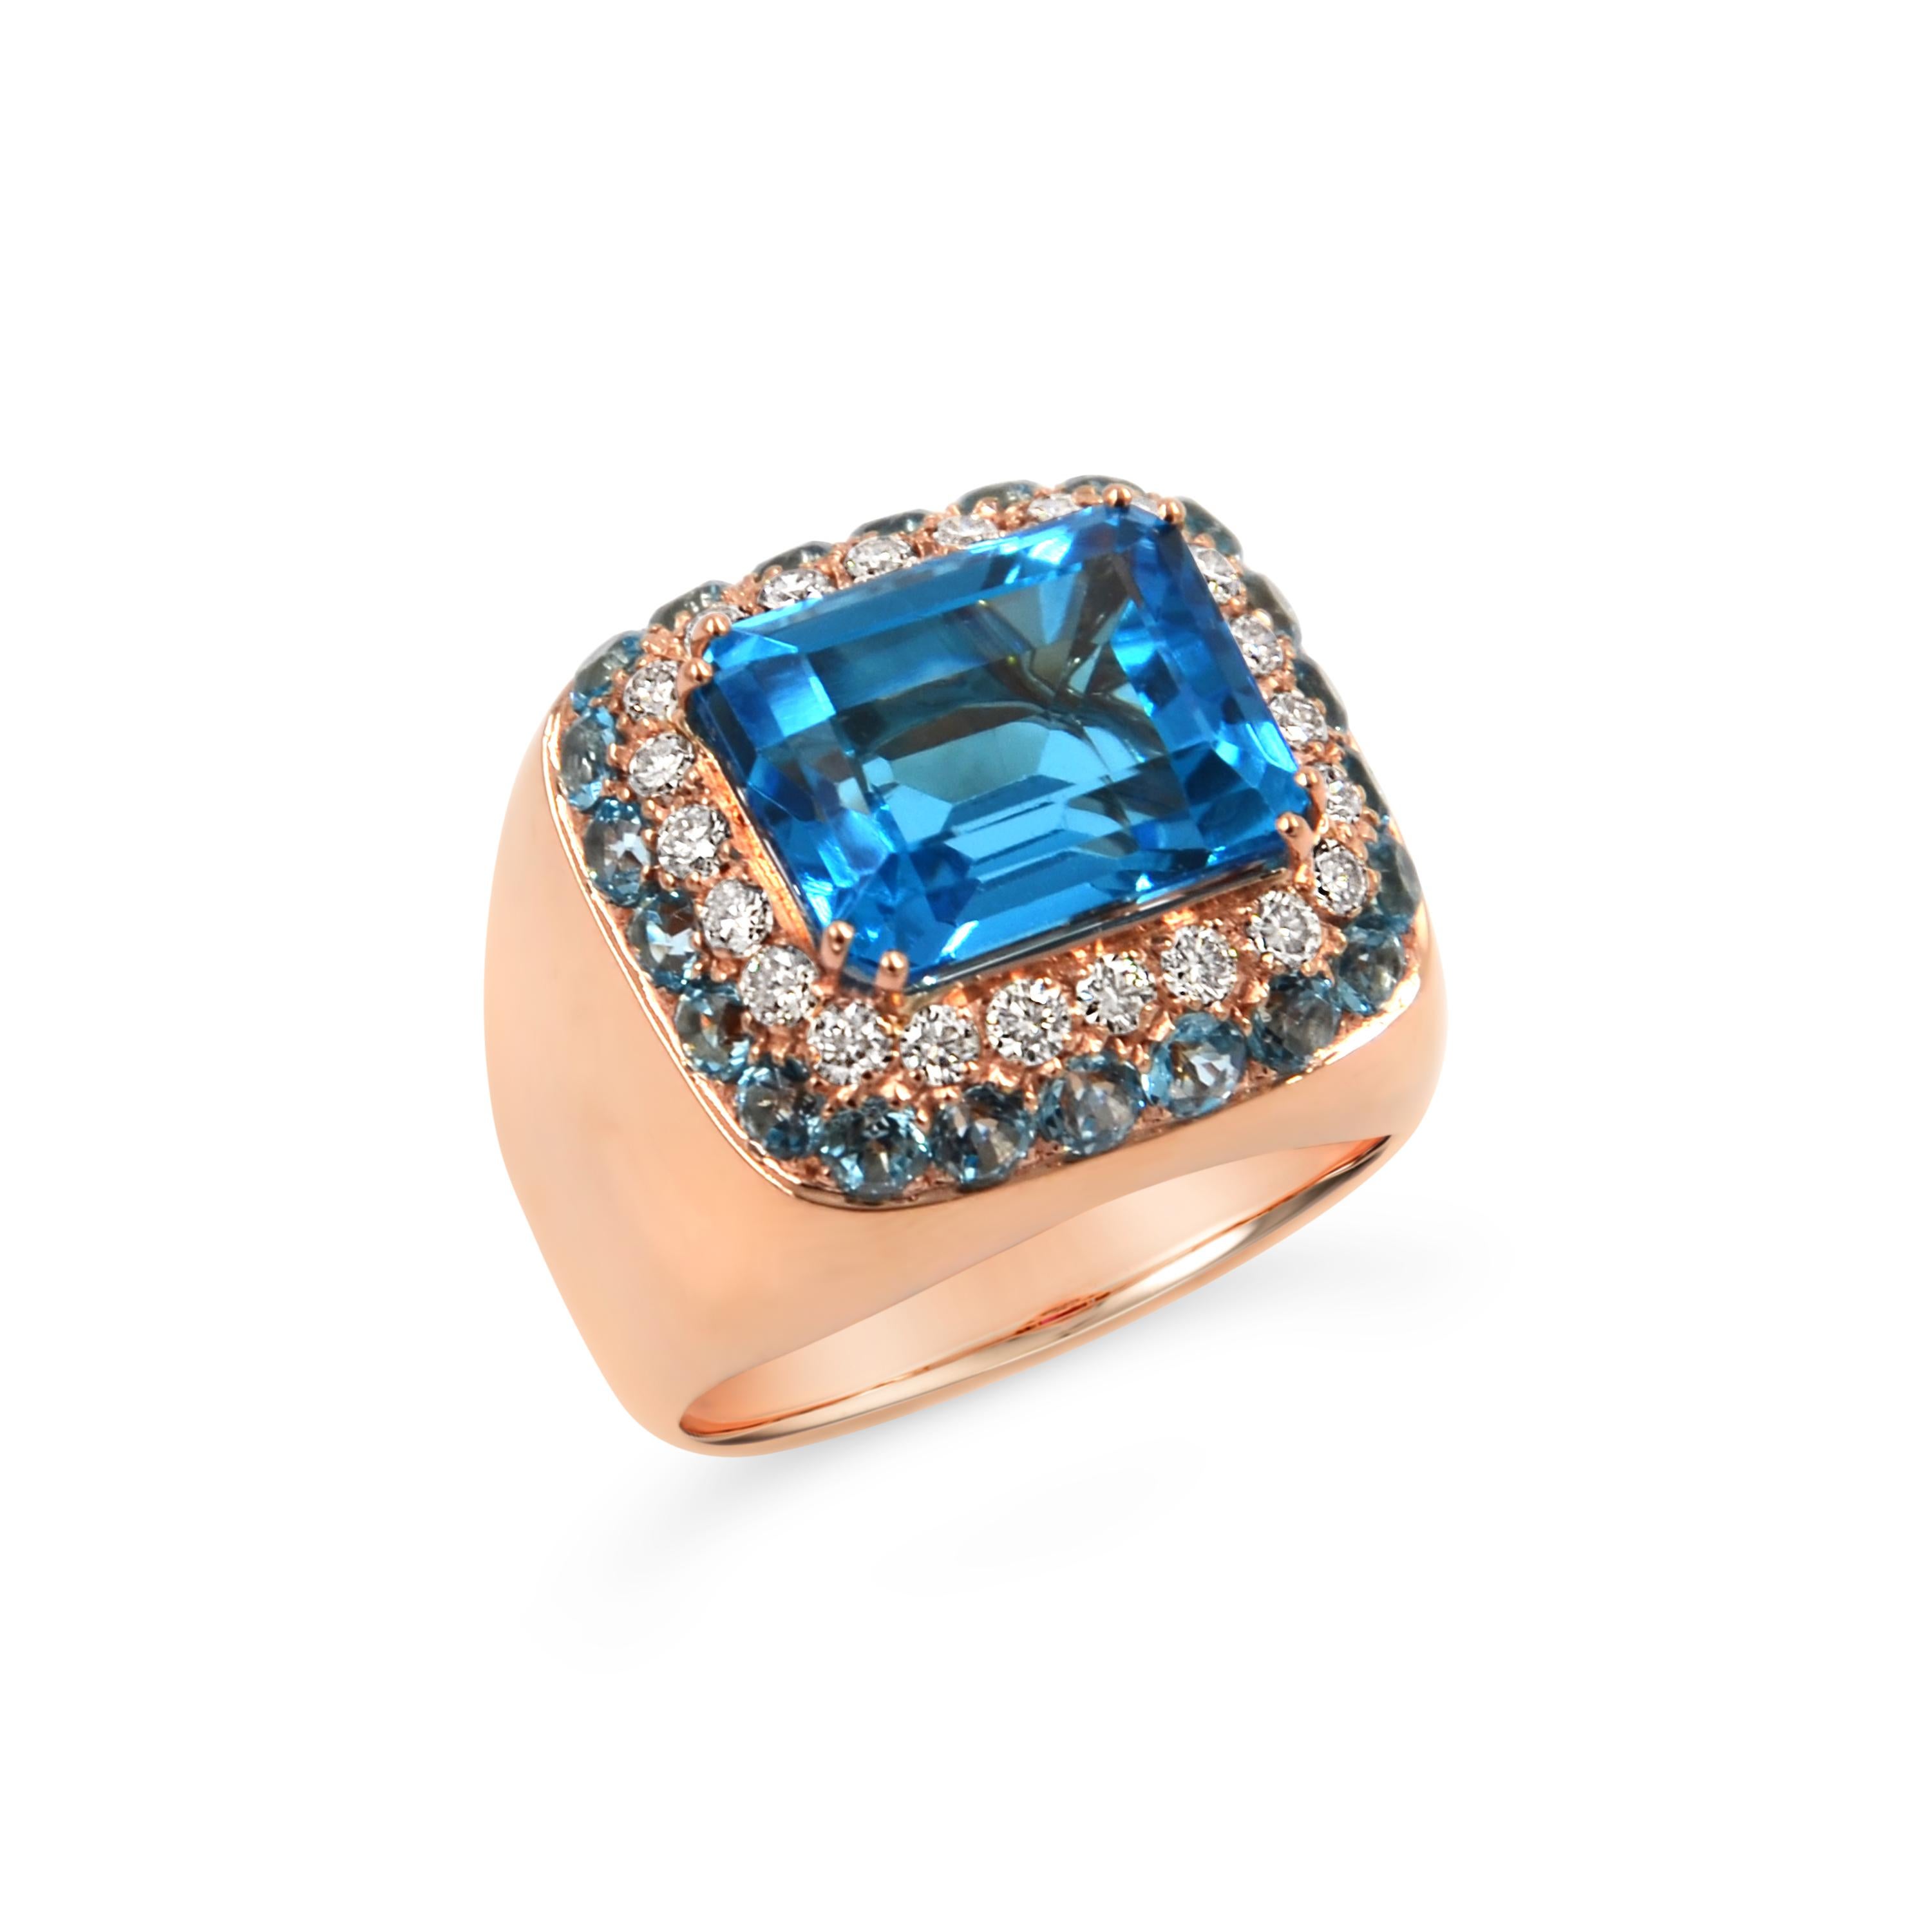 18 Karat White Gold Brown Diamonds and Blue Topaz Ring For Sale 1